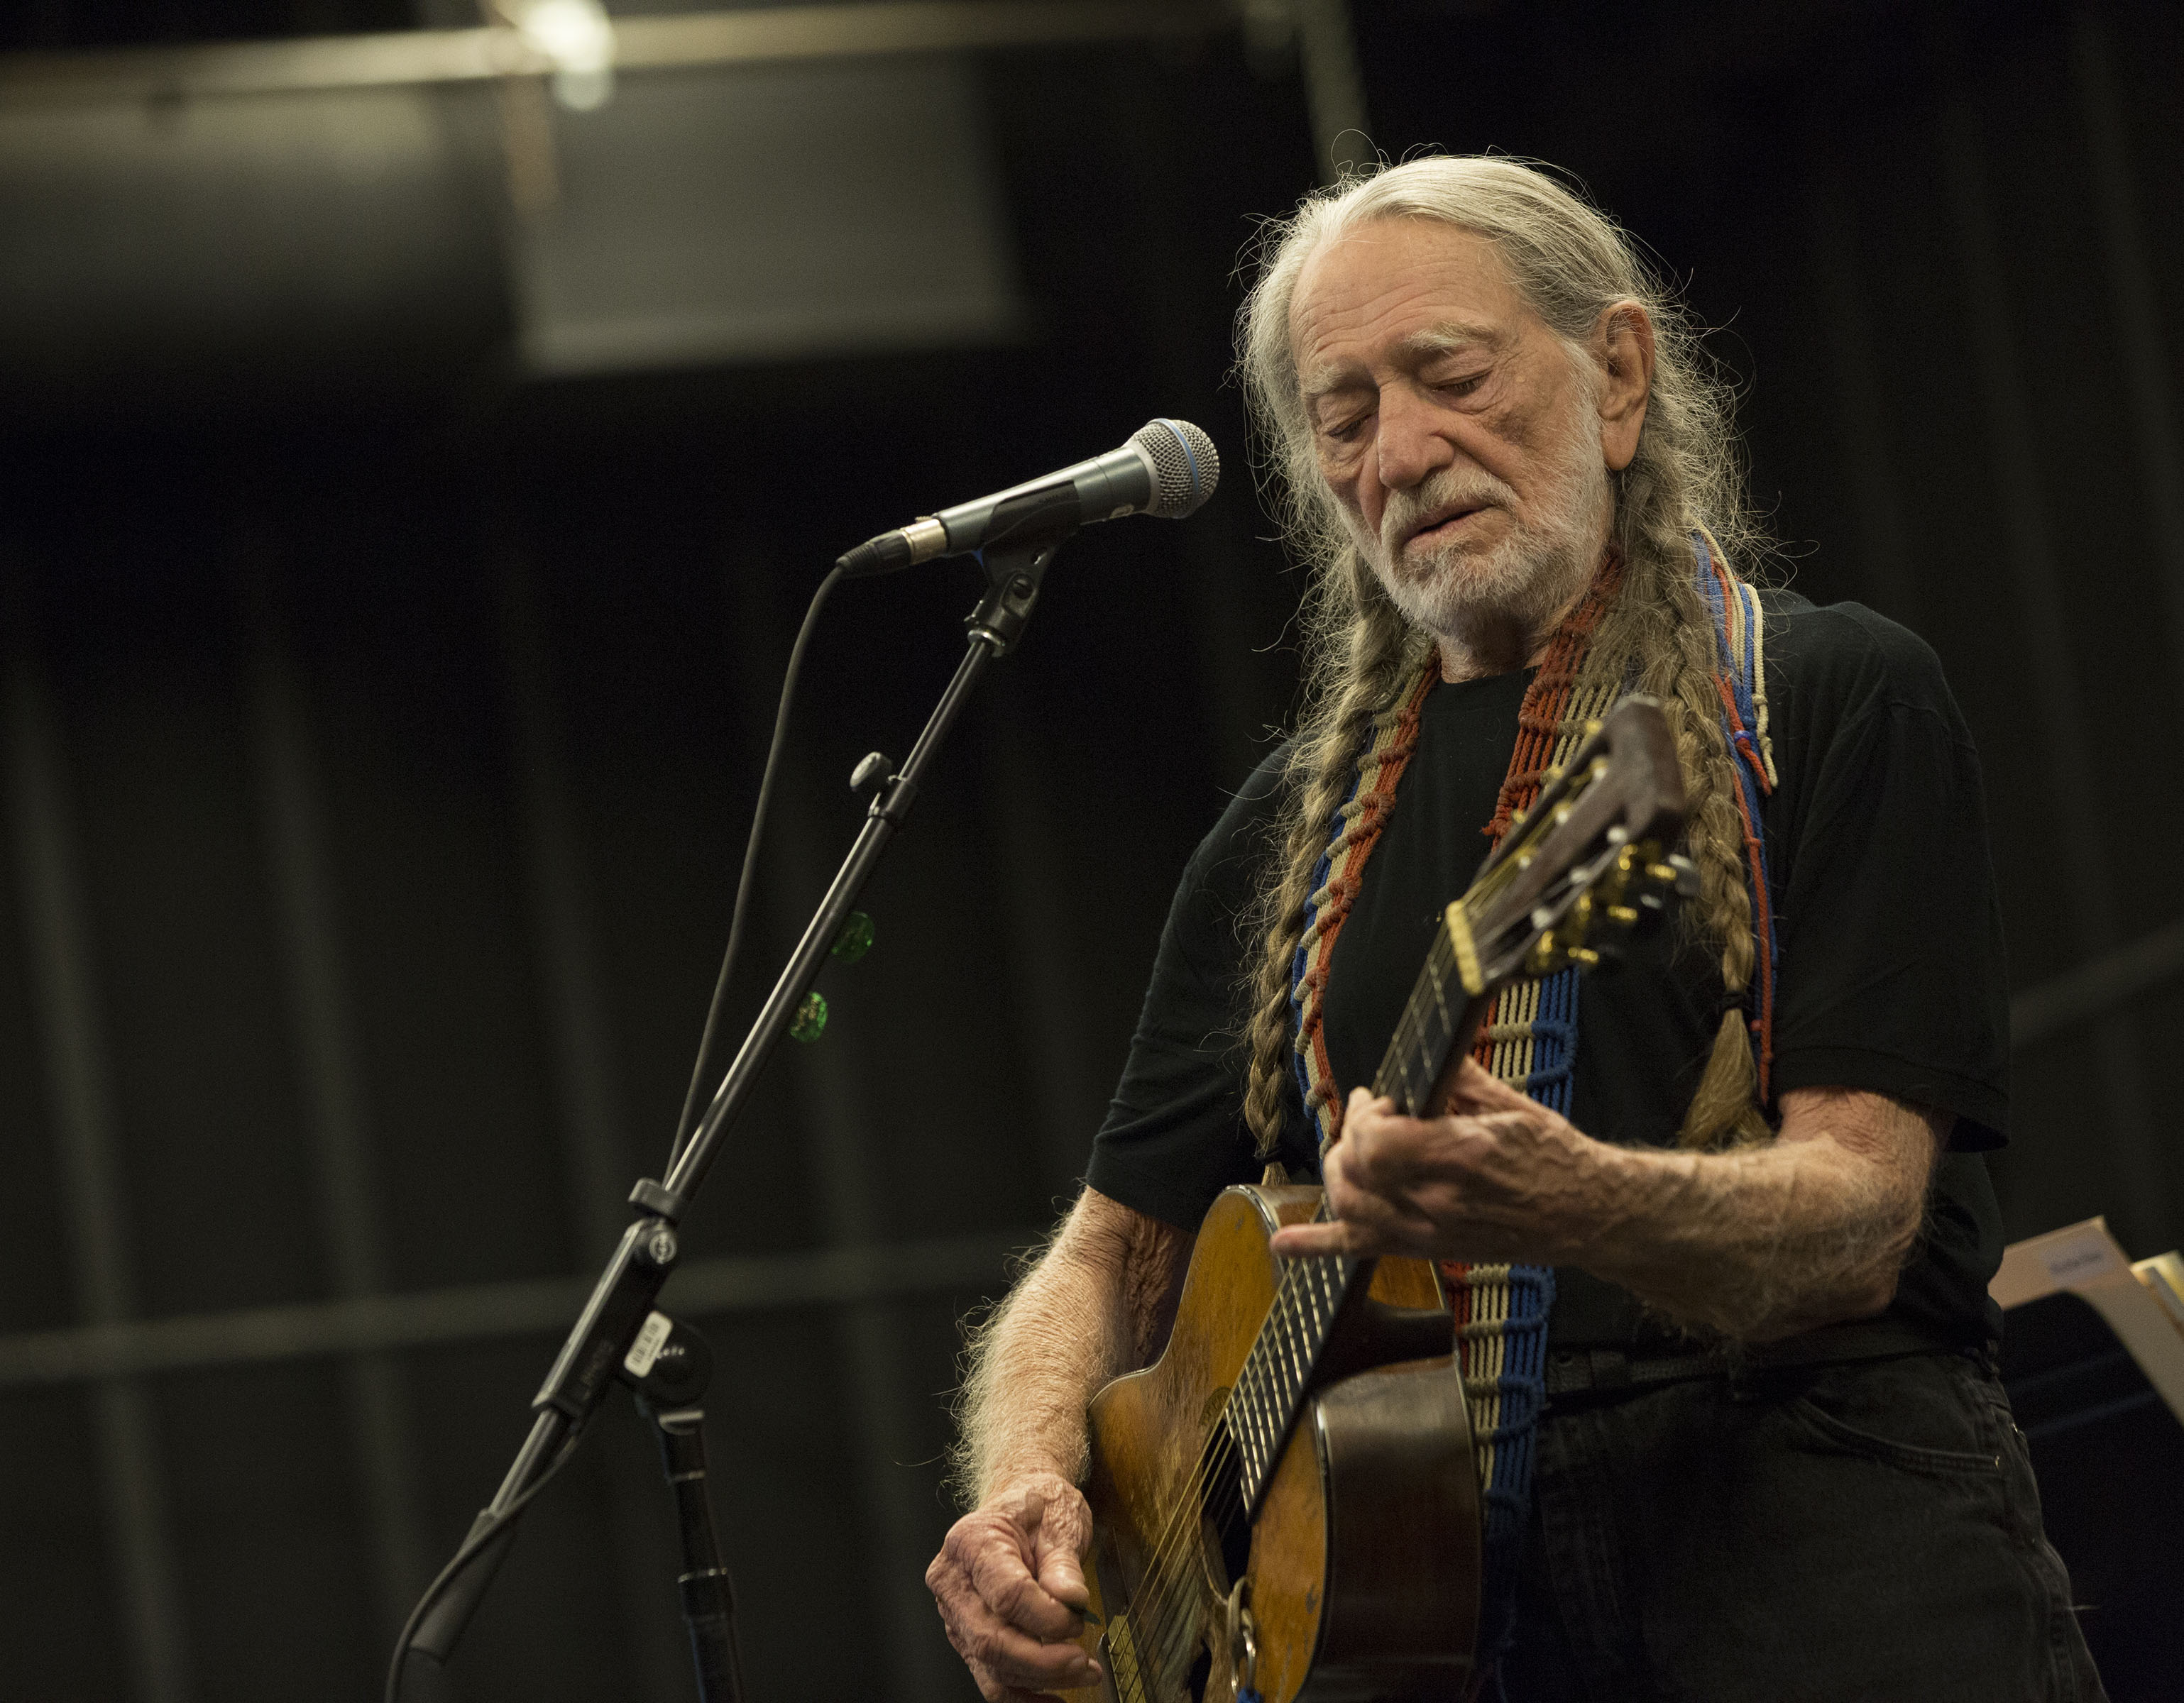 Willie Nelson Walks Off Show Without Playing Due to Illness